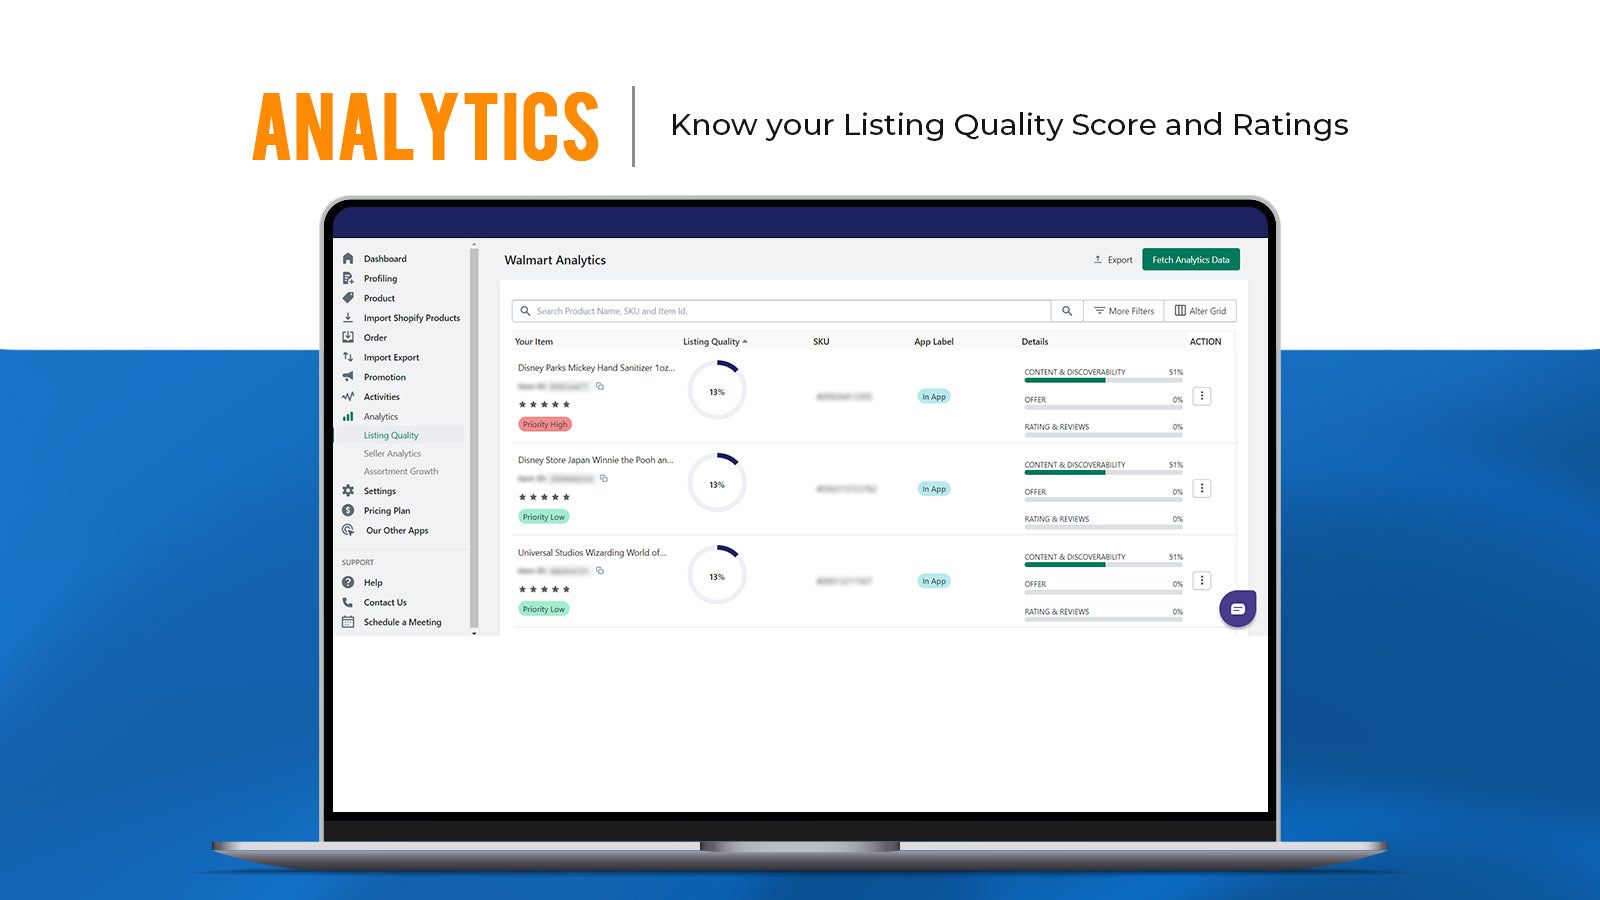 Check your Listing quality score on Analytics section